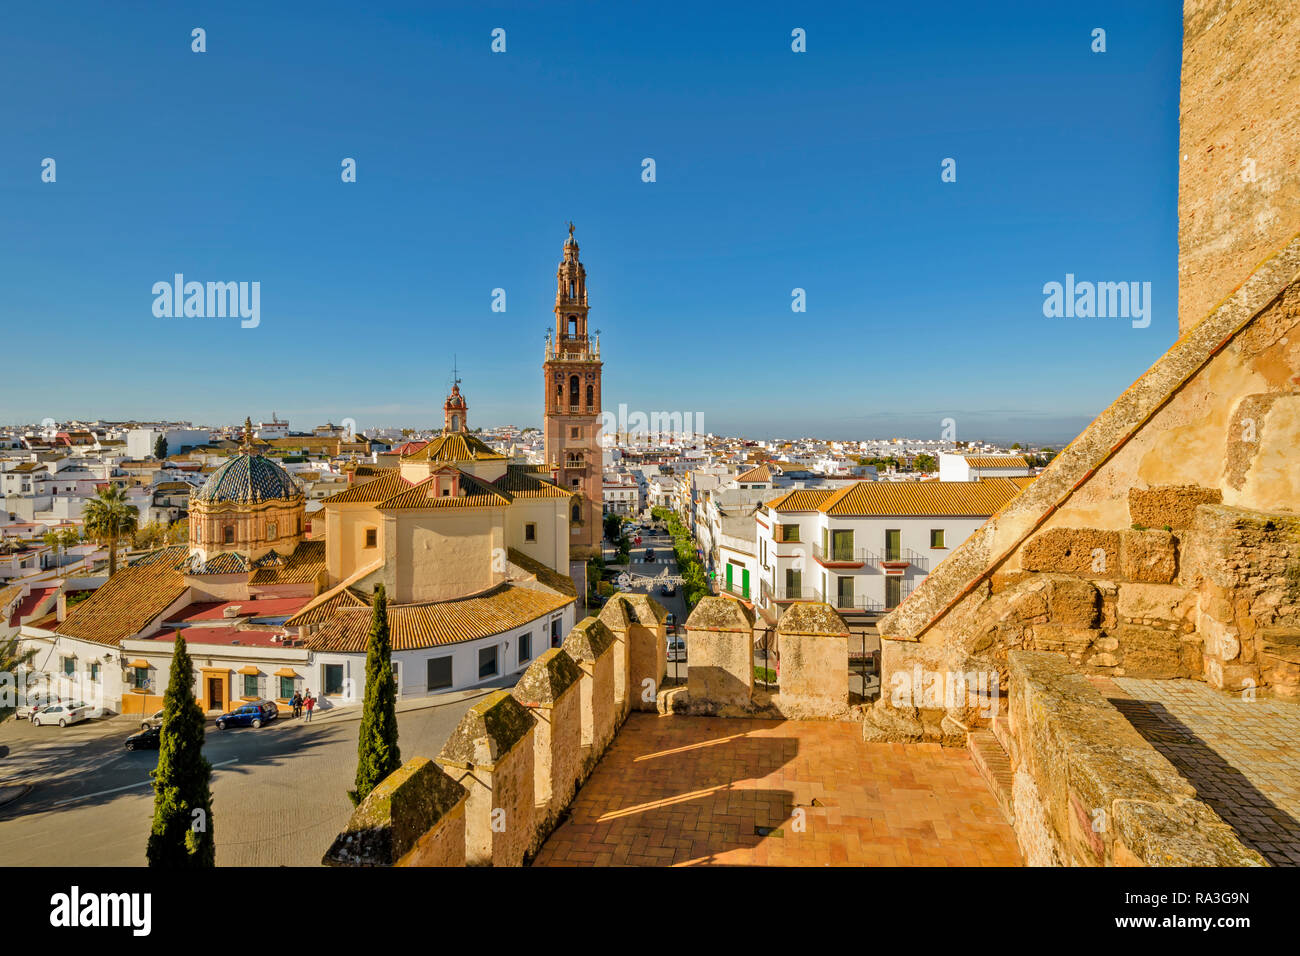 CARMONA SPAIN A  VIEW FROM FORTRESS OF THE GATE OF SEVILLE OVER THE TOWN AND CHURCH TOWER SIMILAR TO THE GIRALDA BELL TOWER Stock Photo